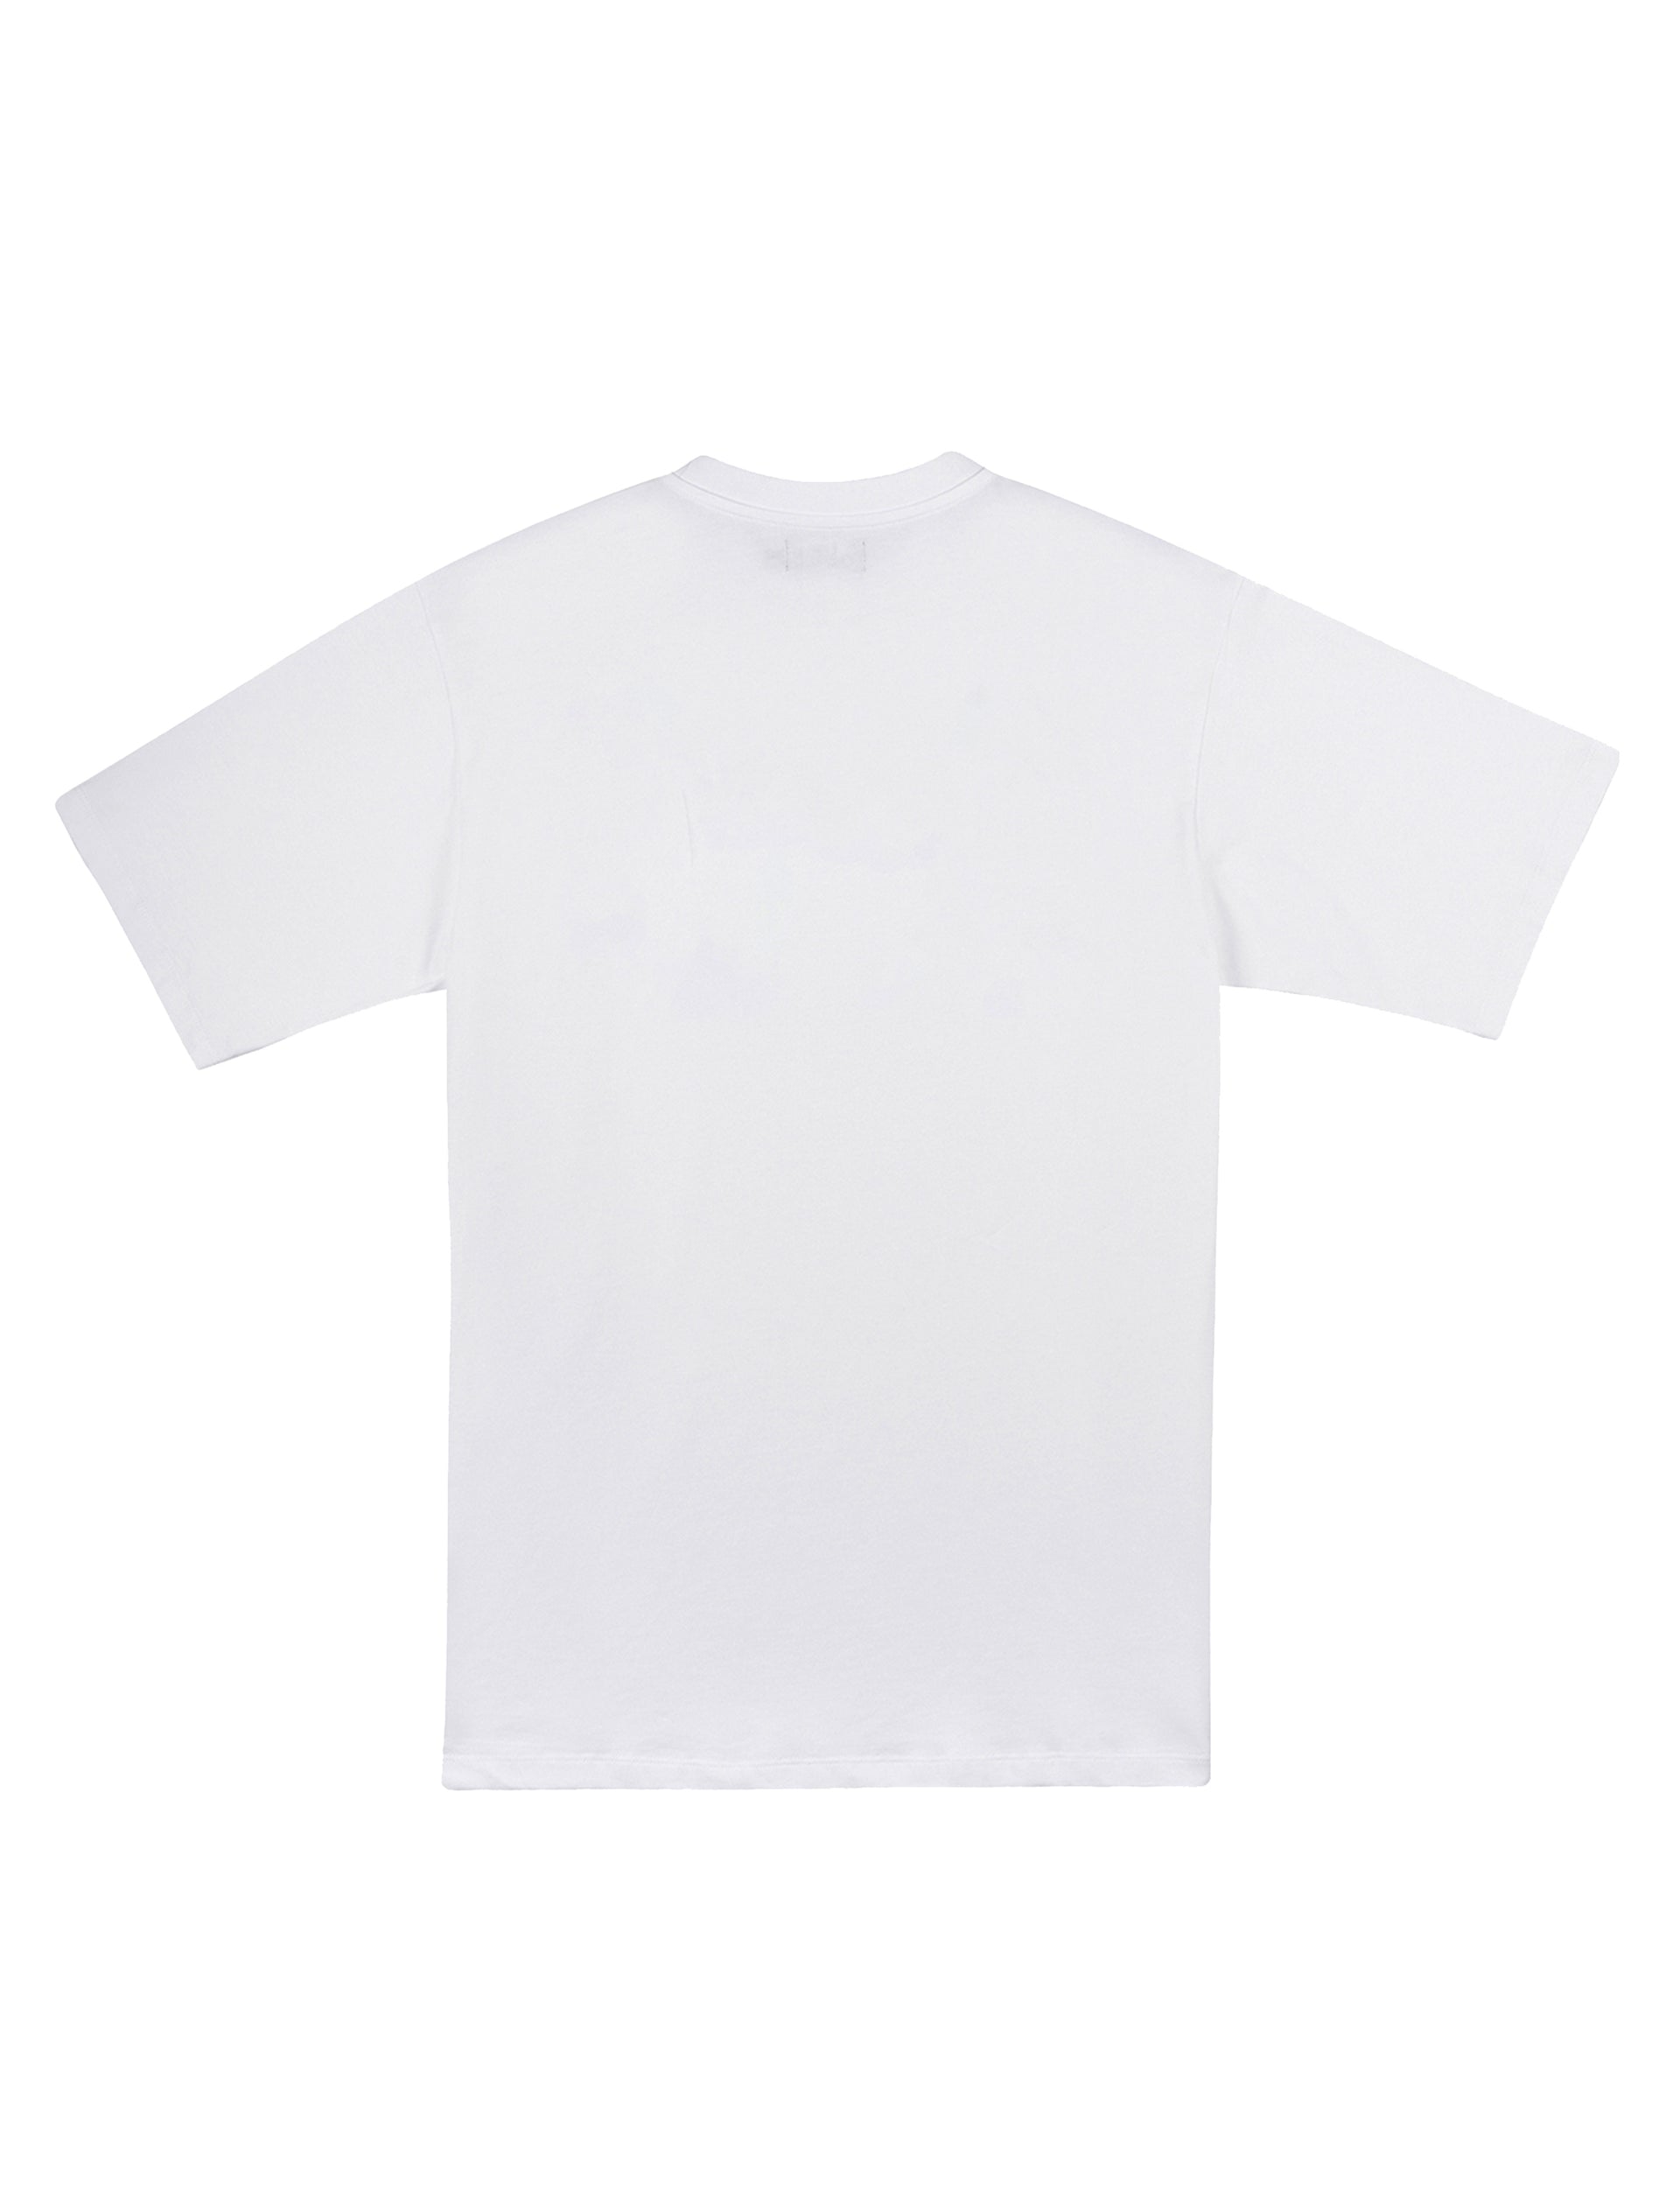 LATE CHECKOUT White Doodle Tee